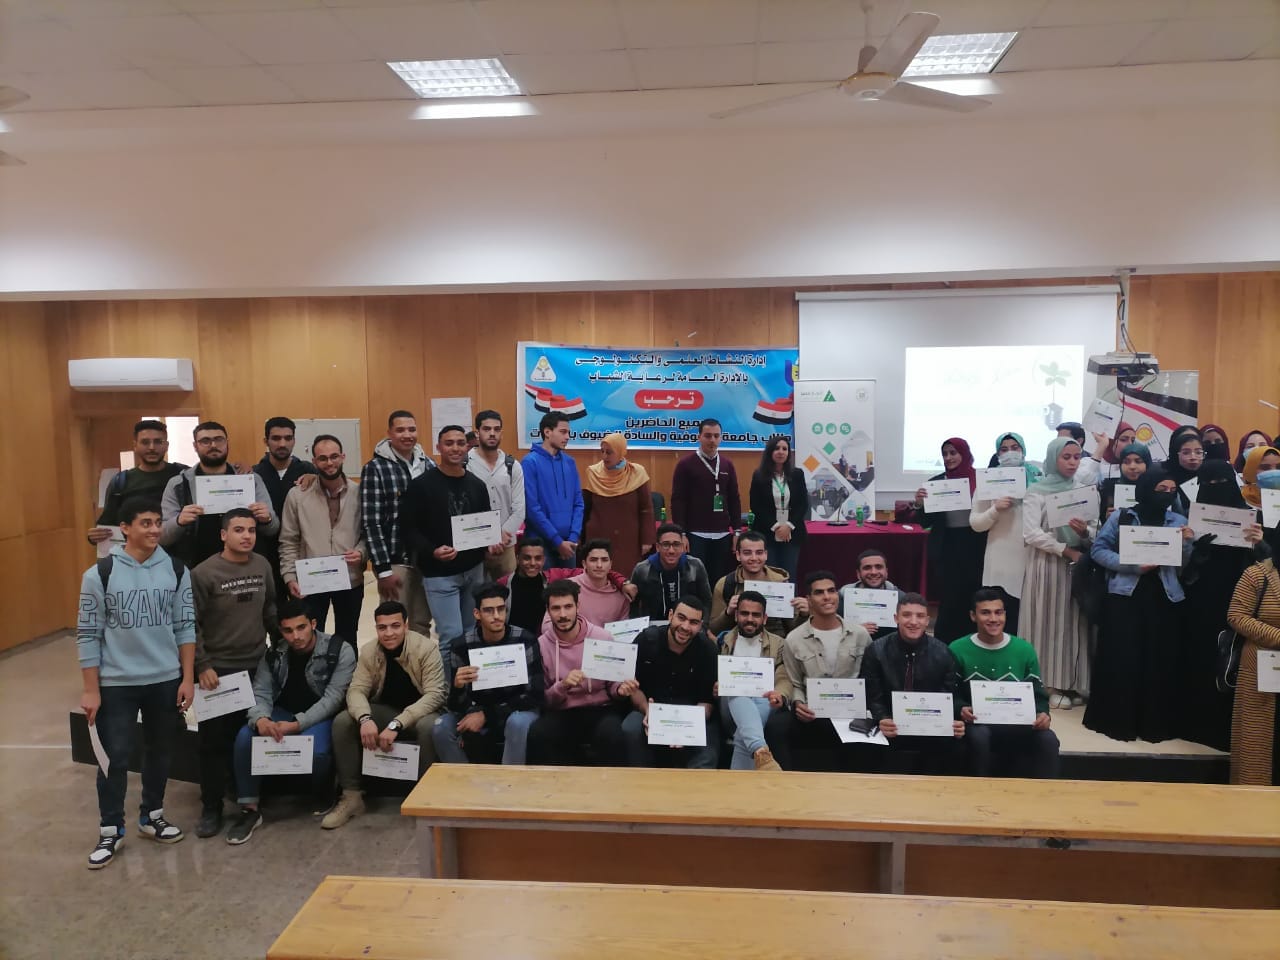 (Injaz Egypt Innovation Camp) at the Faculty of Early Childhood Education